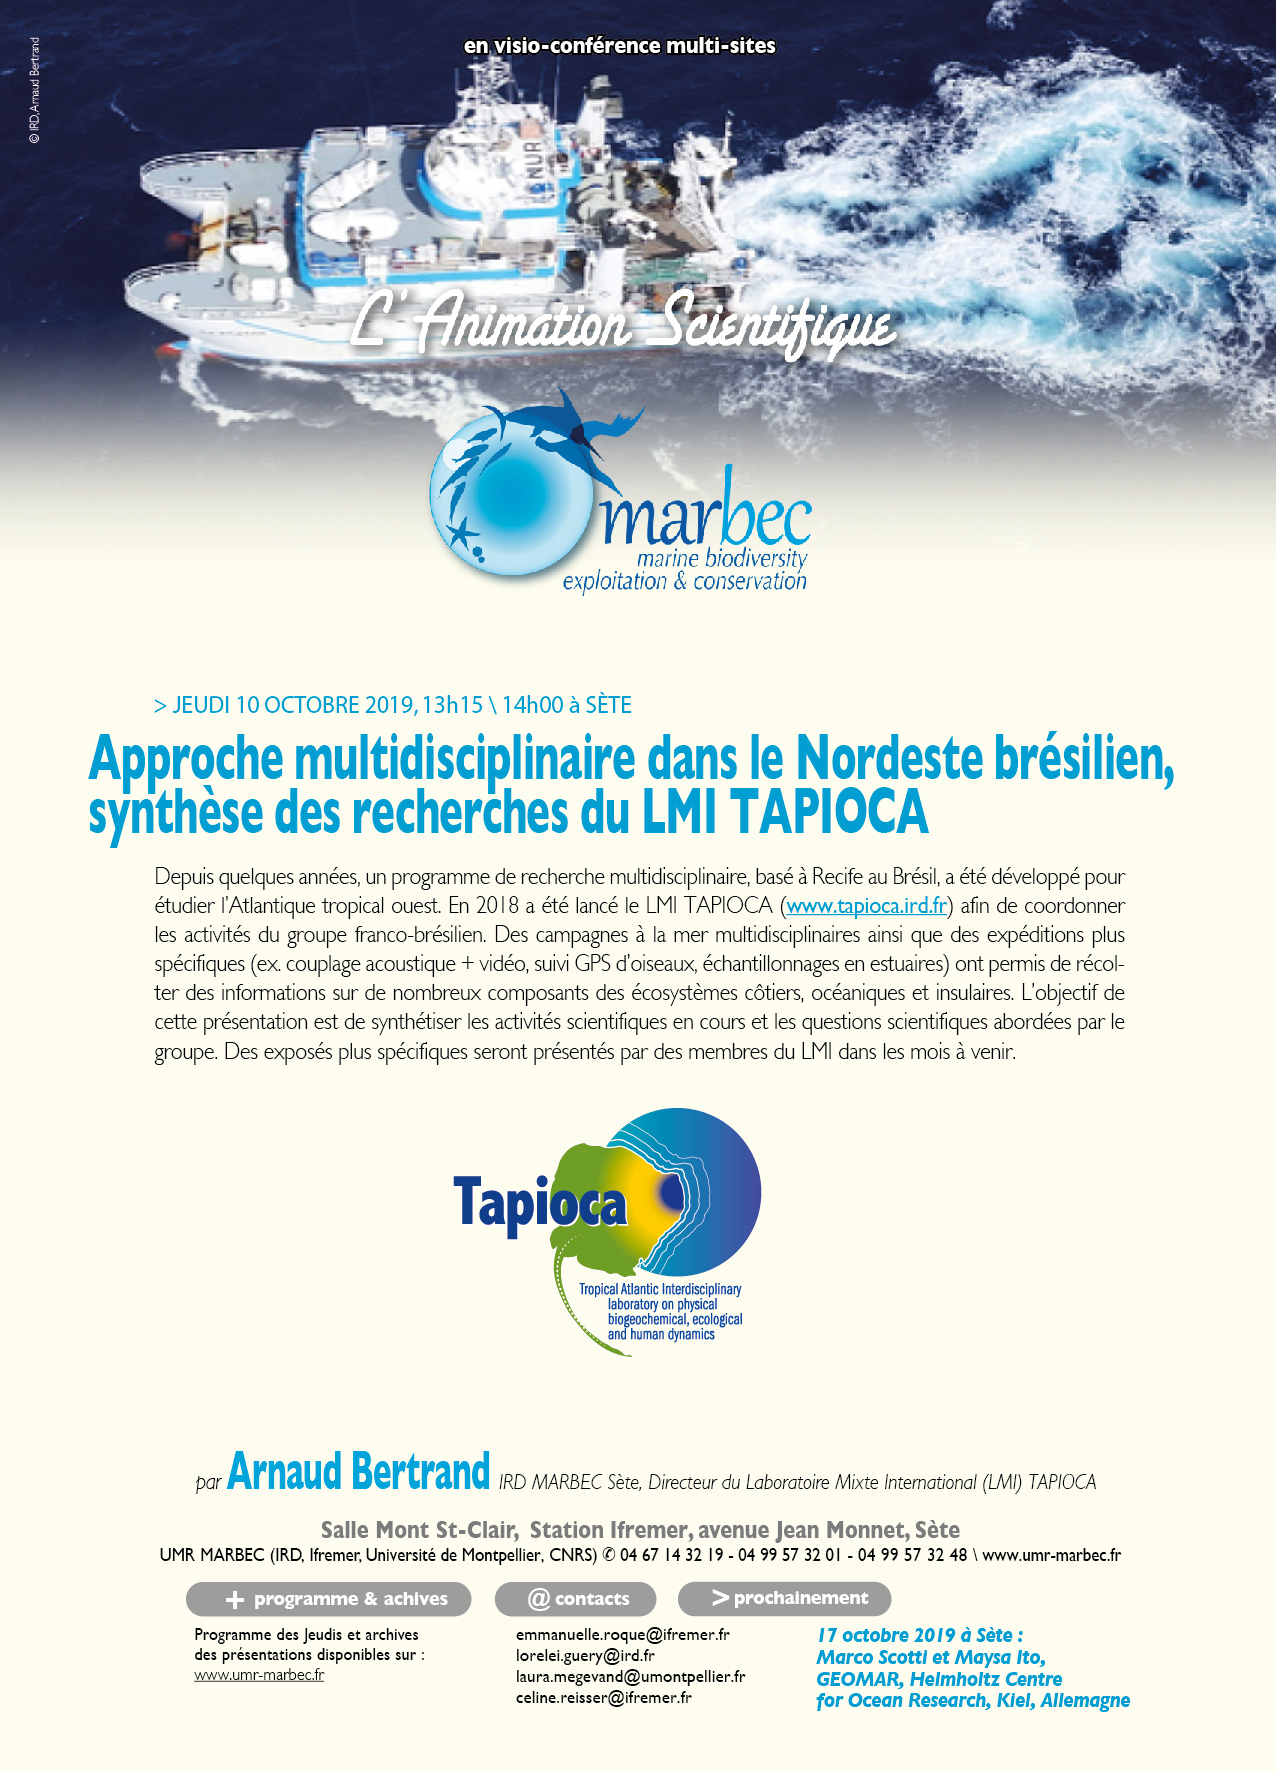 On Thursday 10/10/2019, Arnaud Bertrand presented an overview of the activities of the LMI TAPIOCA to the research unit Marbec in France (Sète-Montpellier).